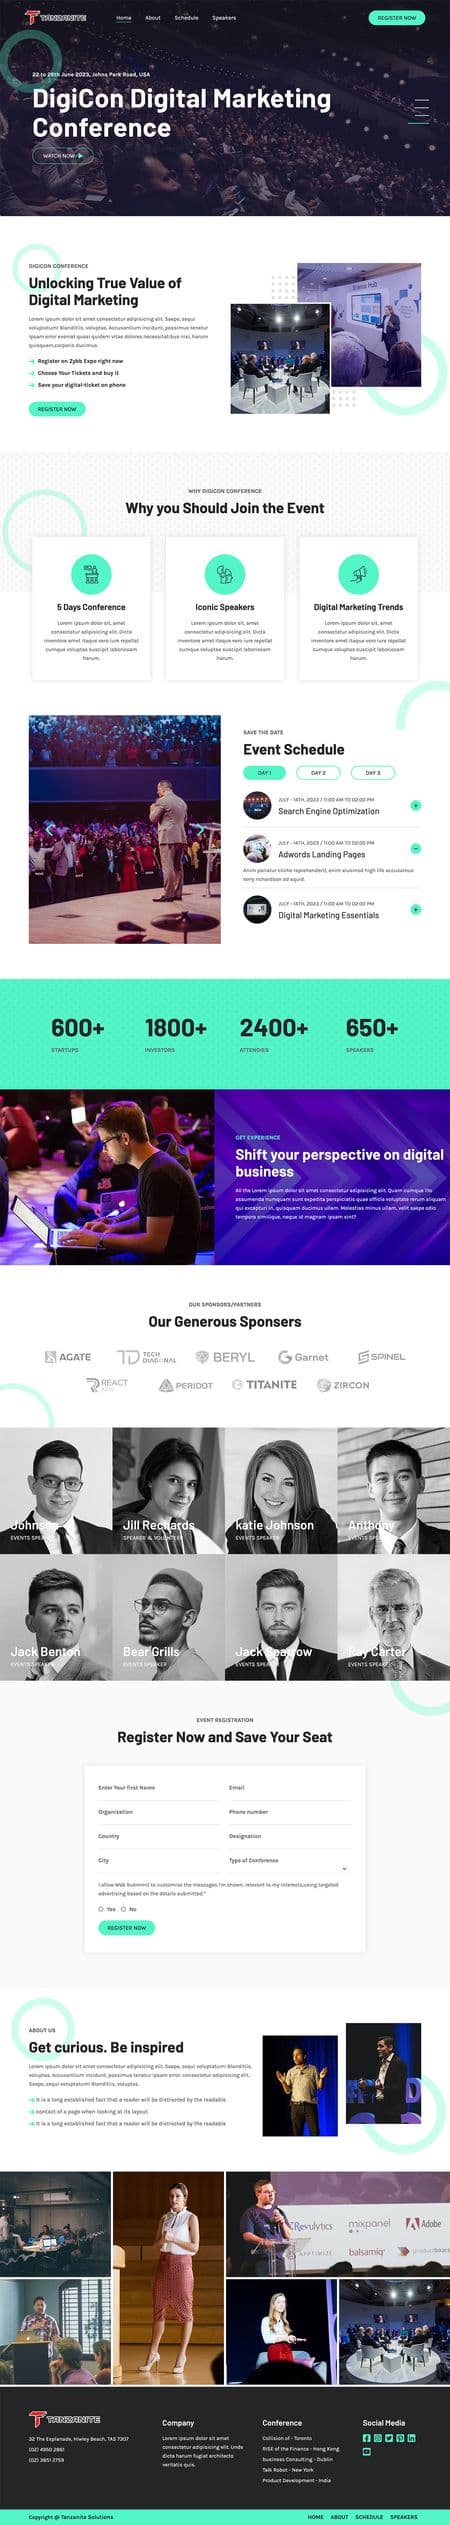 Tanzanite - Event and Conference Landing Pages Image 2